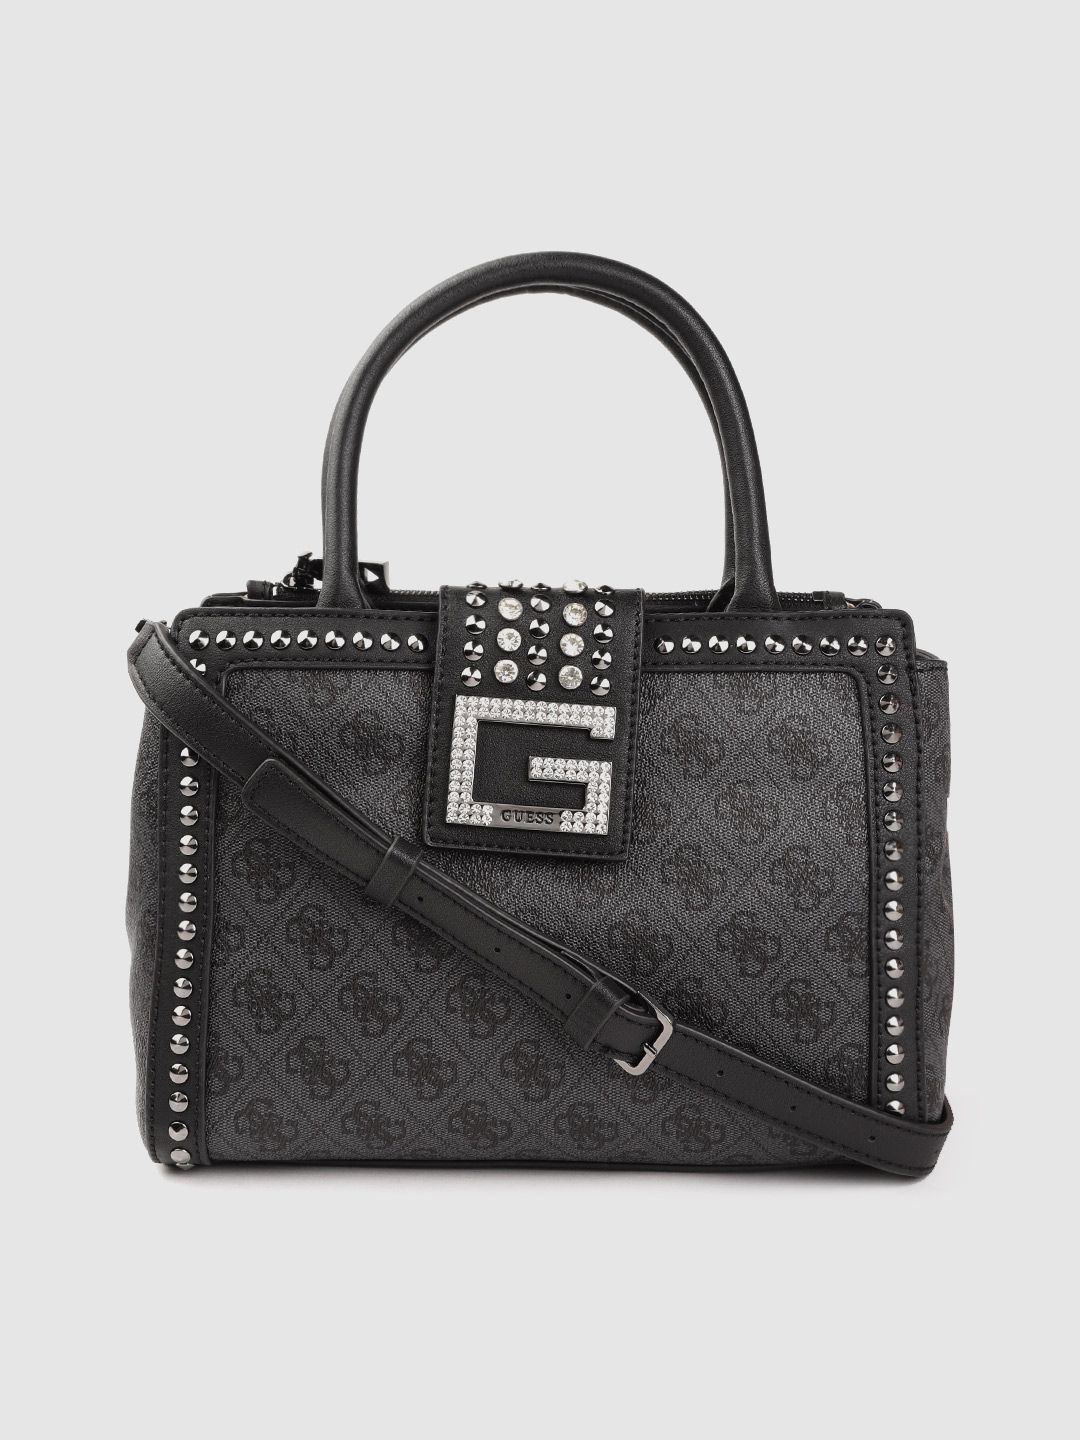 GUESS Charcoal Grey & Black Brand Logo Printed Structured Handheld Bag Price in India